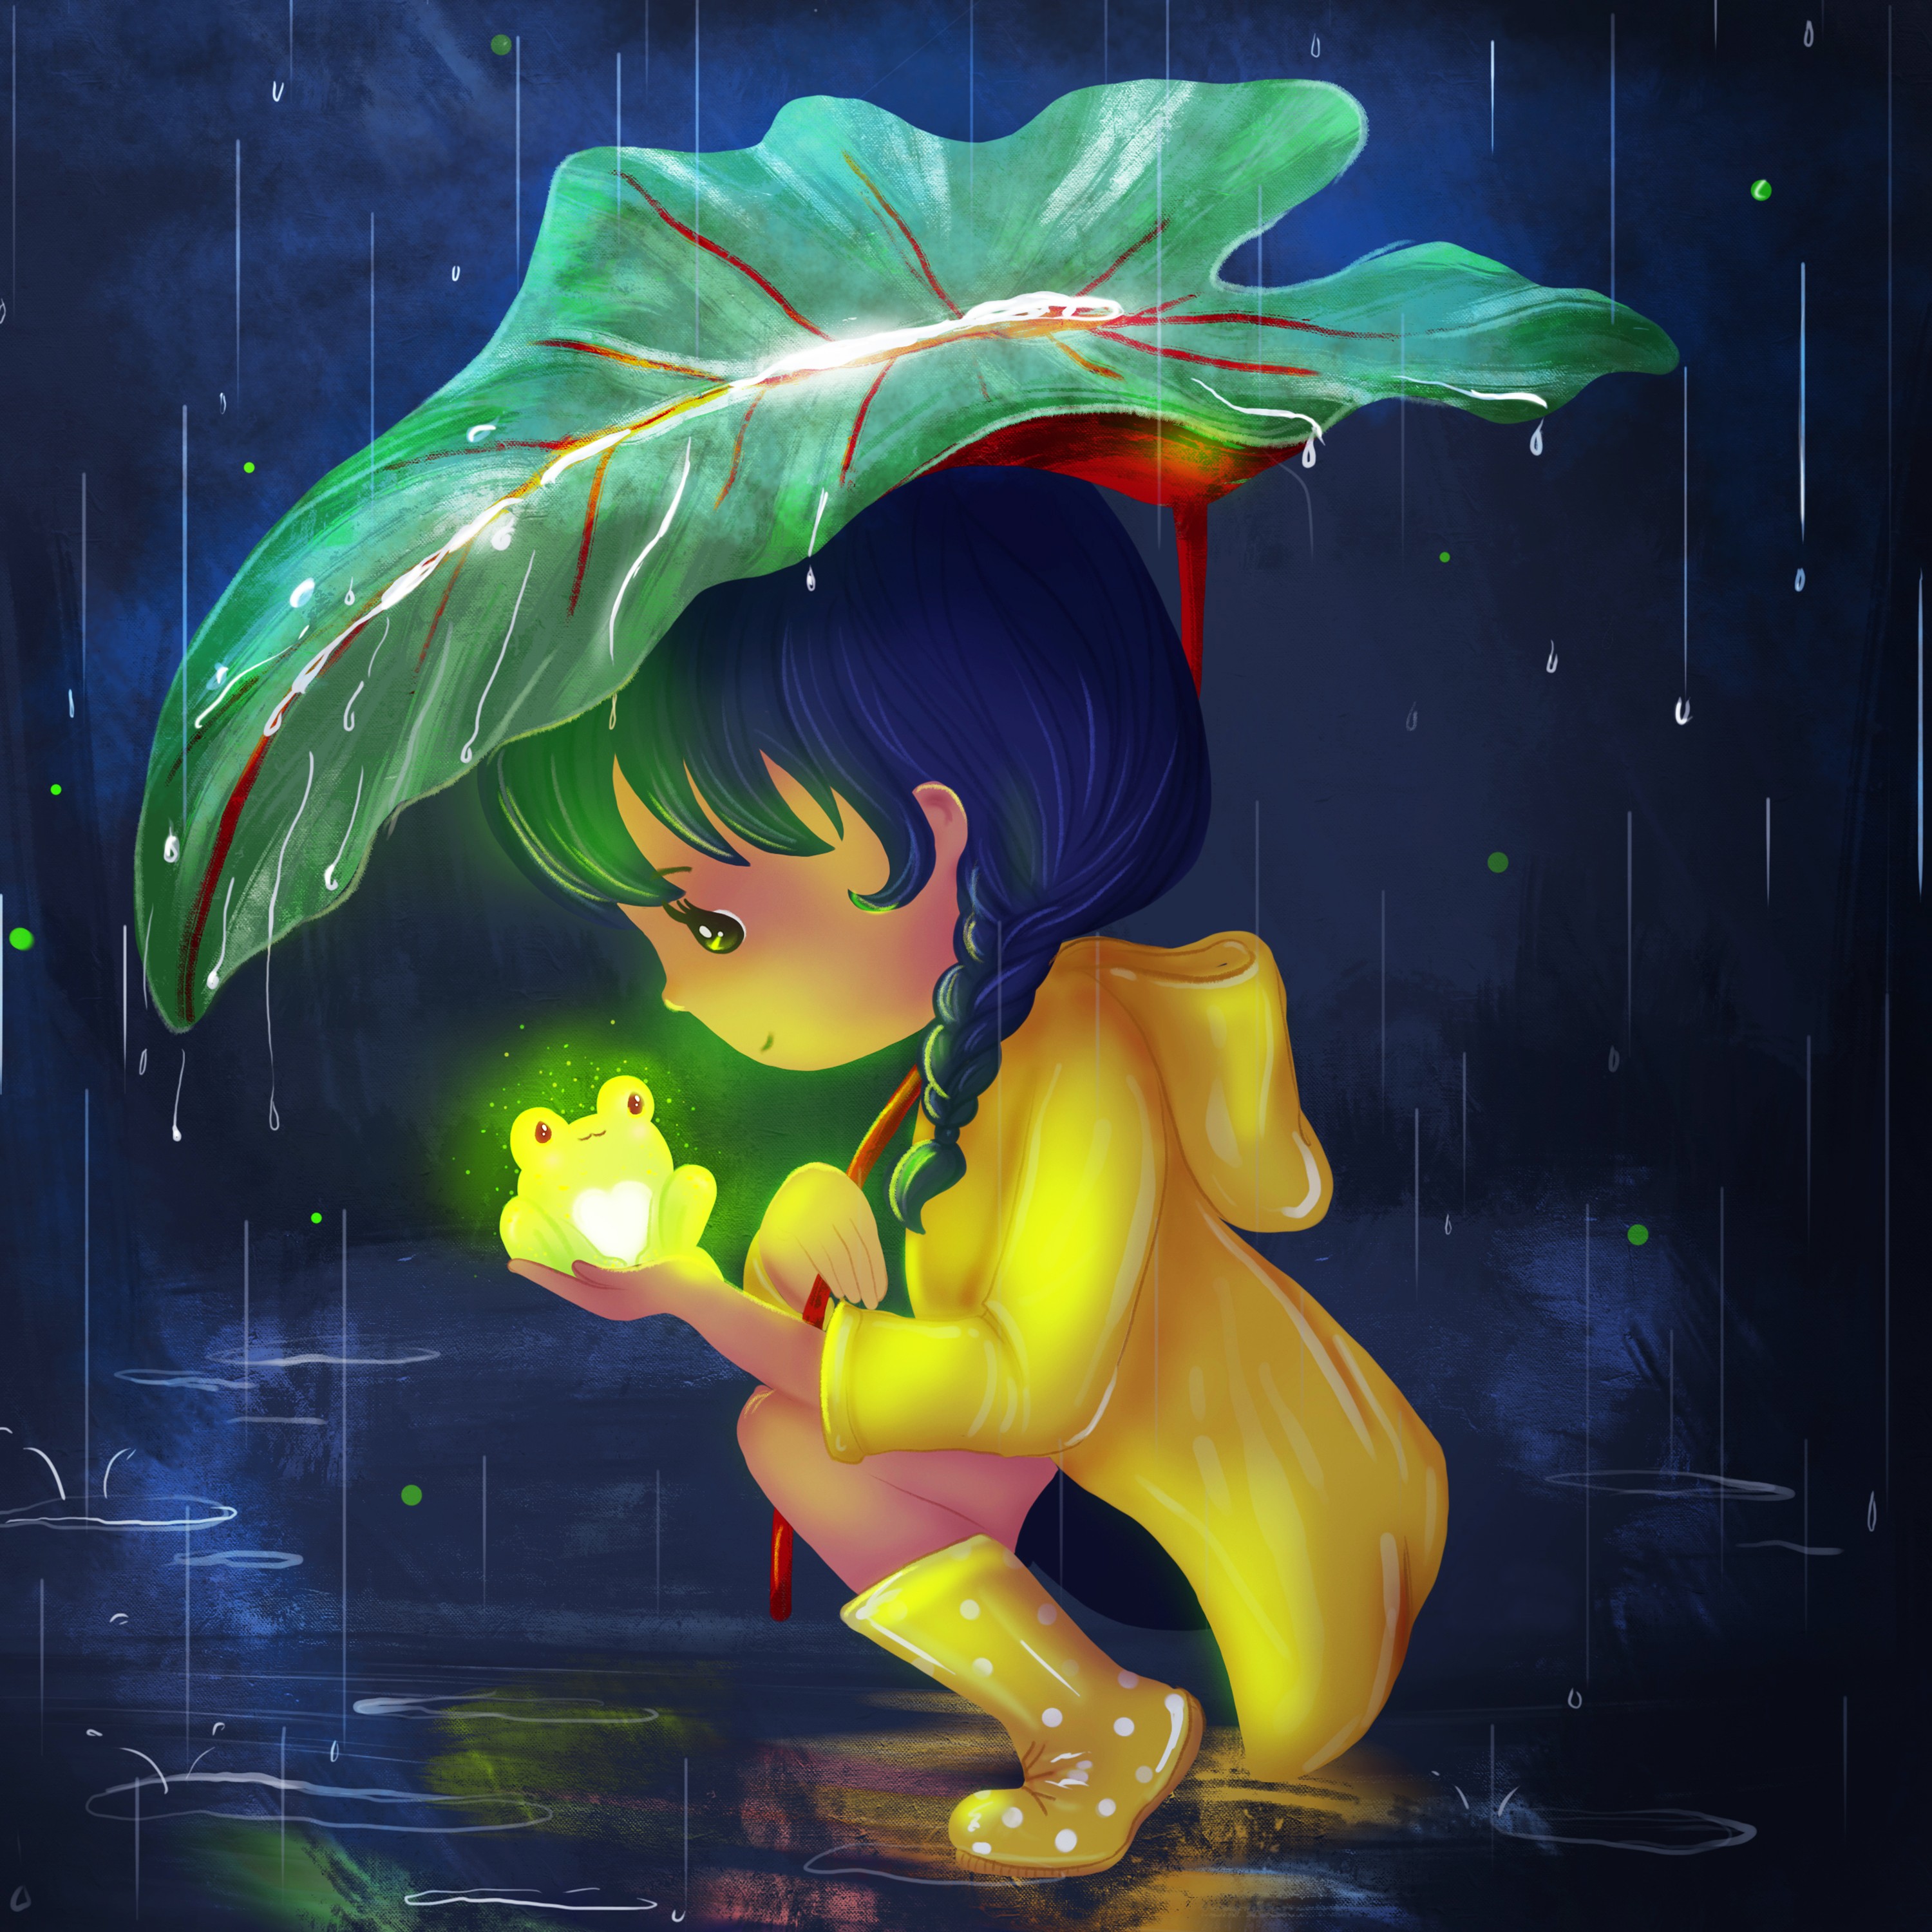 5D Diamond Painting picture girl with frog in the rain.